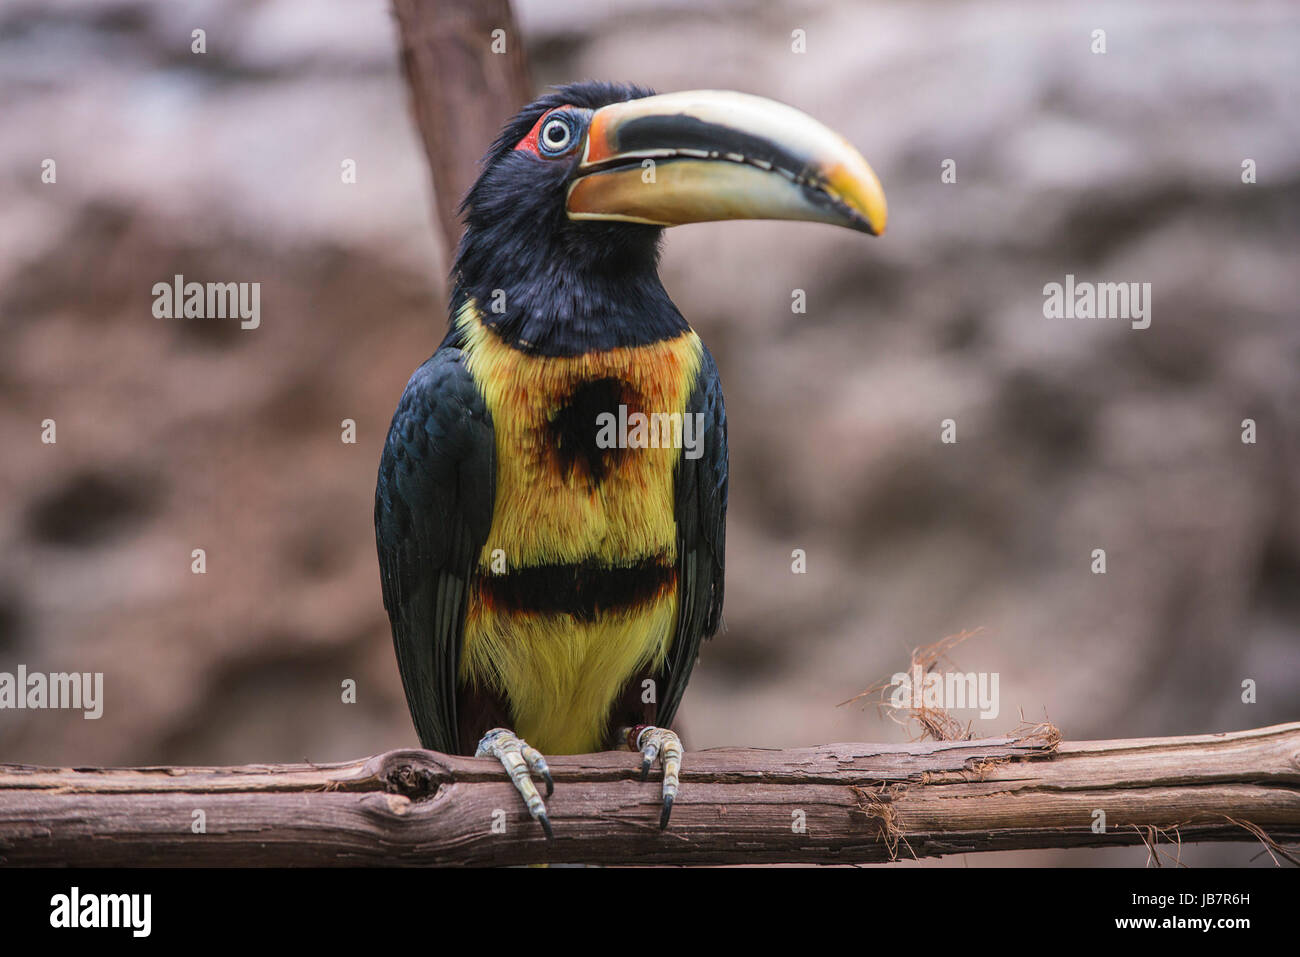 Crested Aracari - perched on the tree branch close-up shot Stock Photo